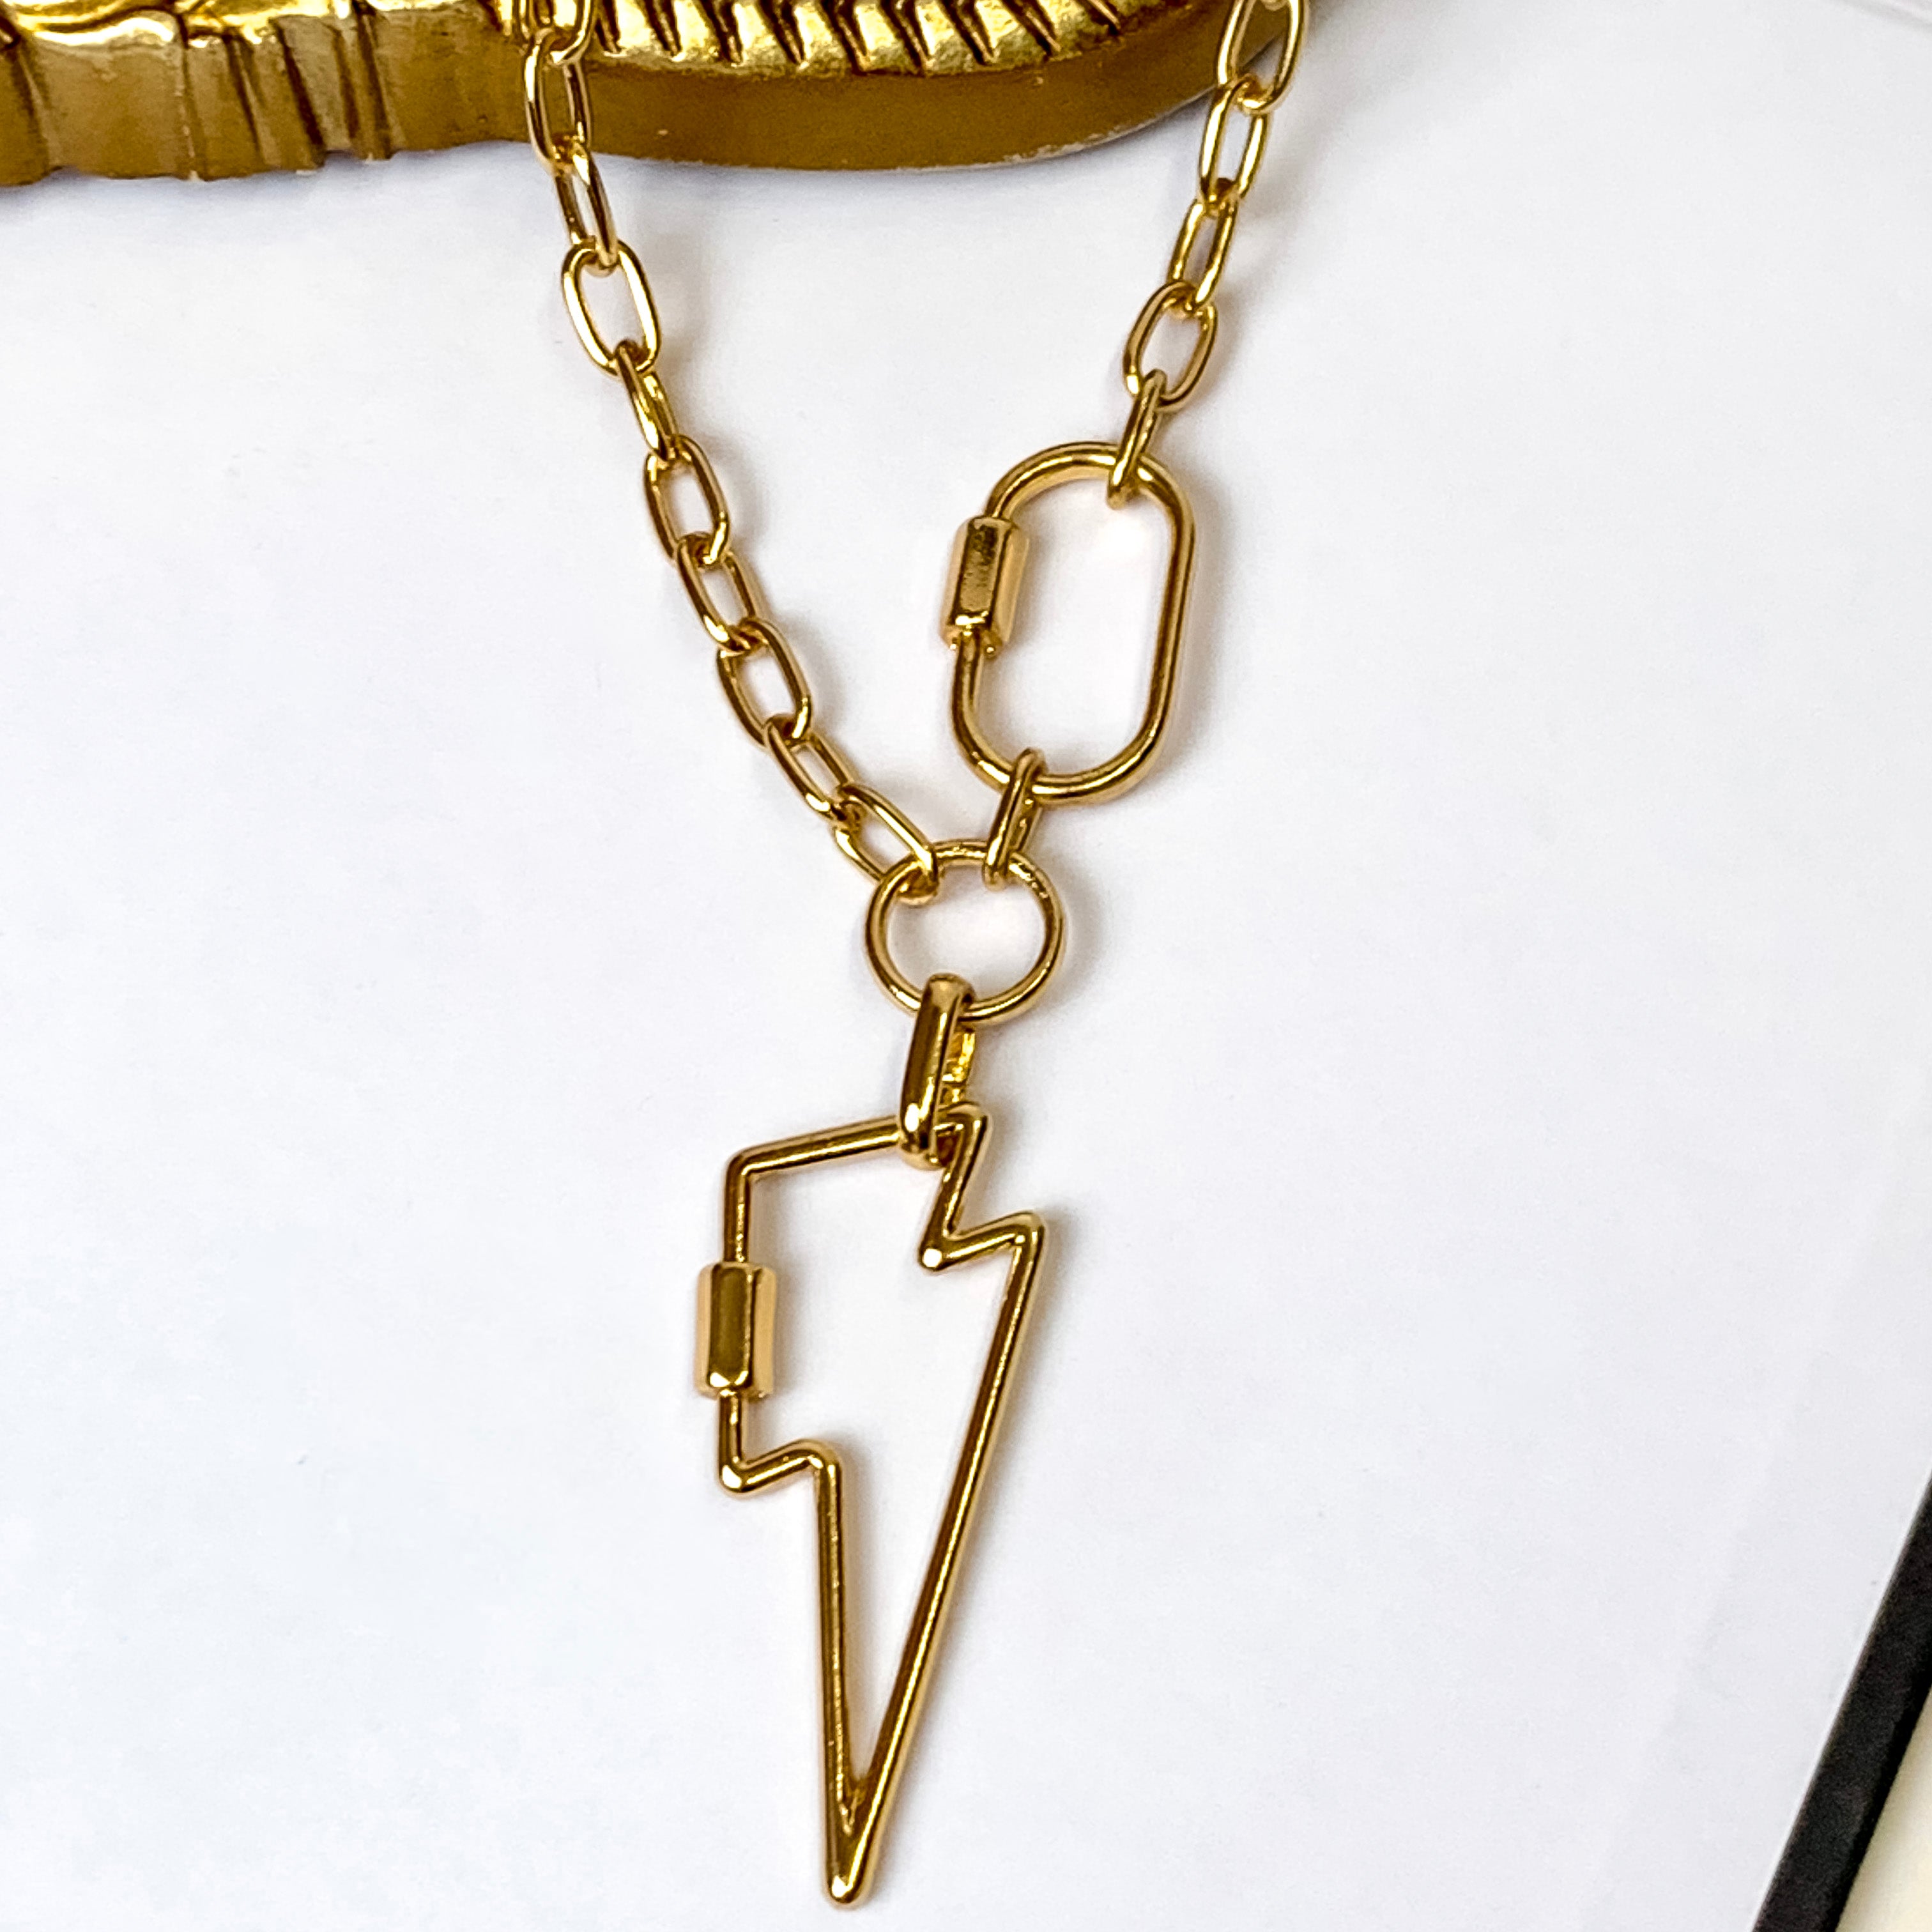 Gold Chain Carabiner Necklace with Lightning Bolt Pendant - Giddy Up Glamour Boutique